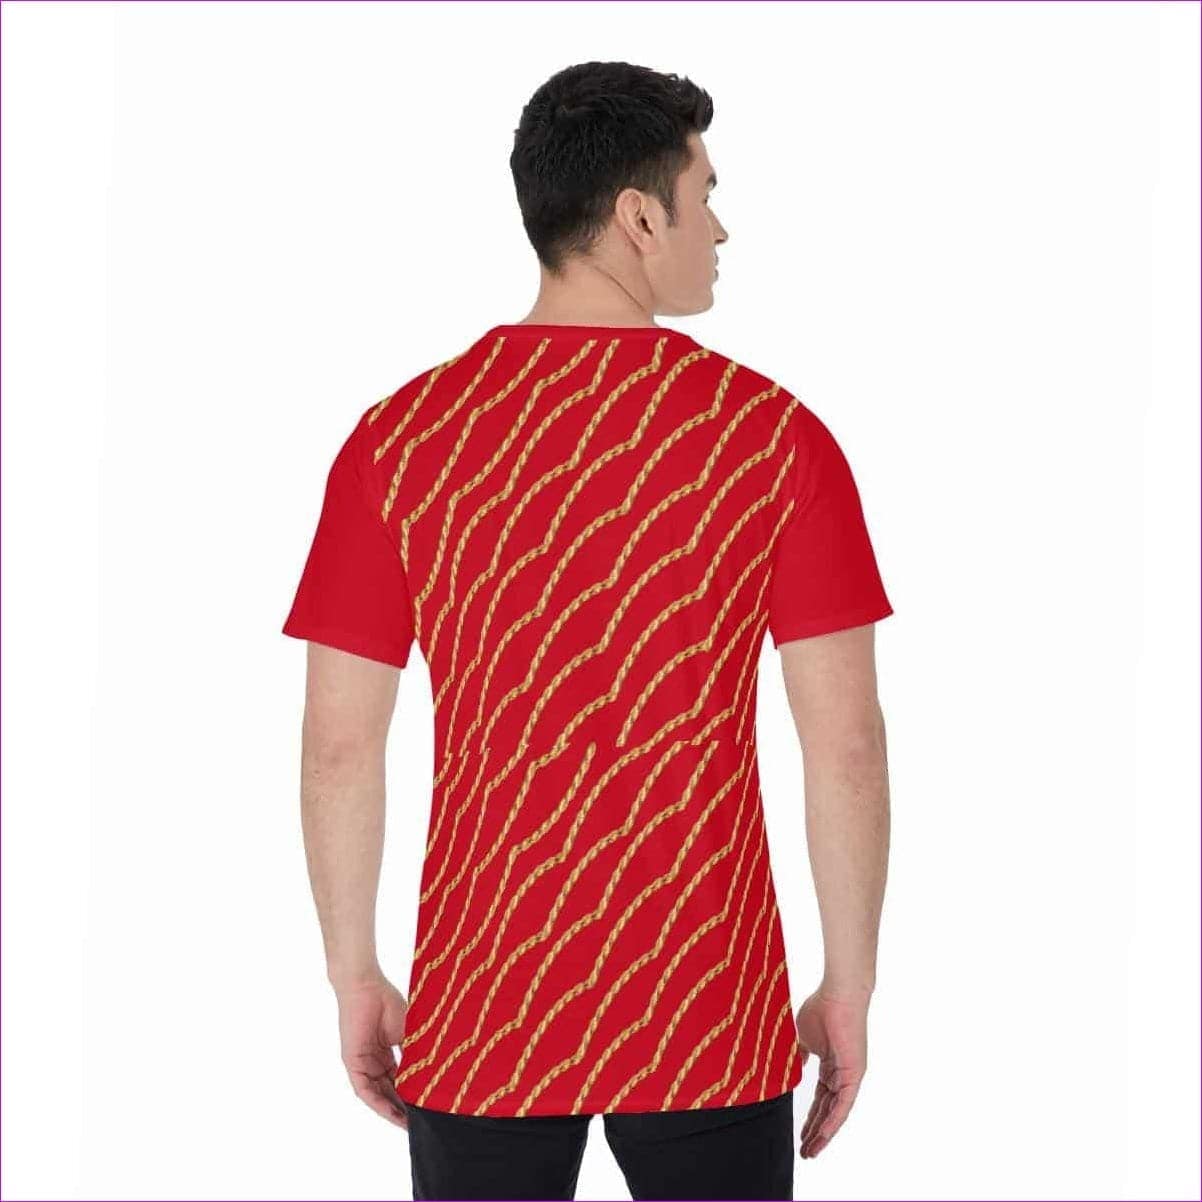 - Chained Men's O-Neck T-Shirt - Red - Mens T-Shirts at TFC&H Co.